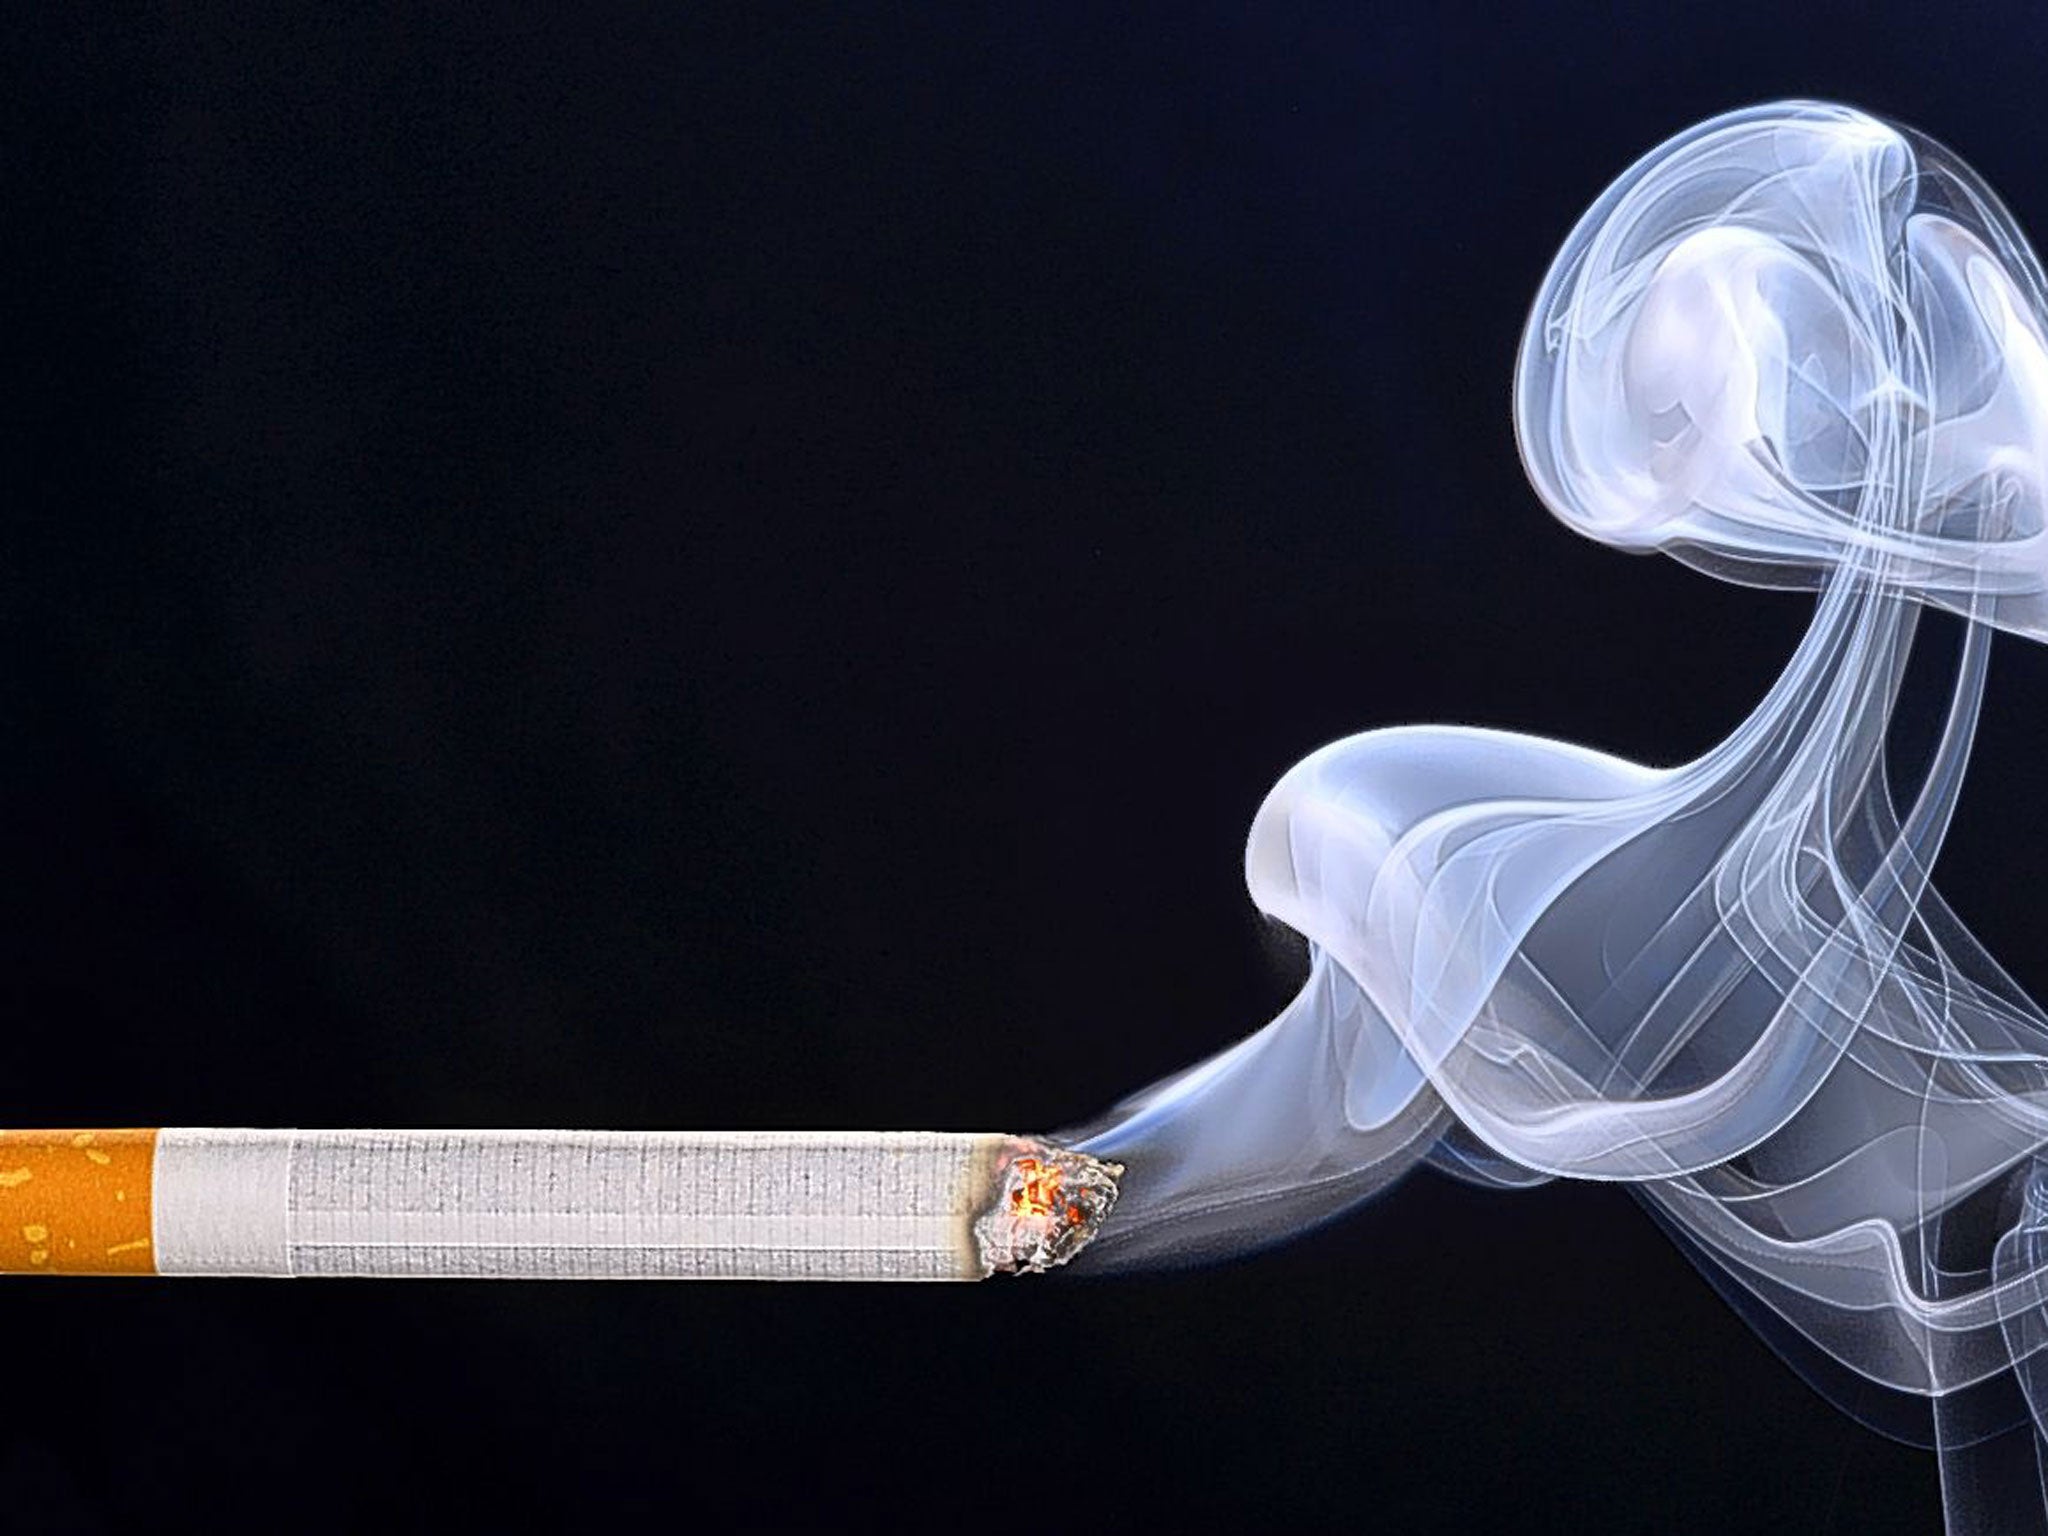 For every day you carry on smoking after your mid-thirties, you will lose an average of six hours of life